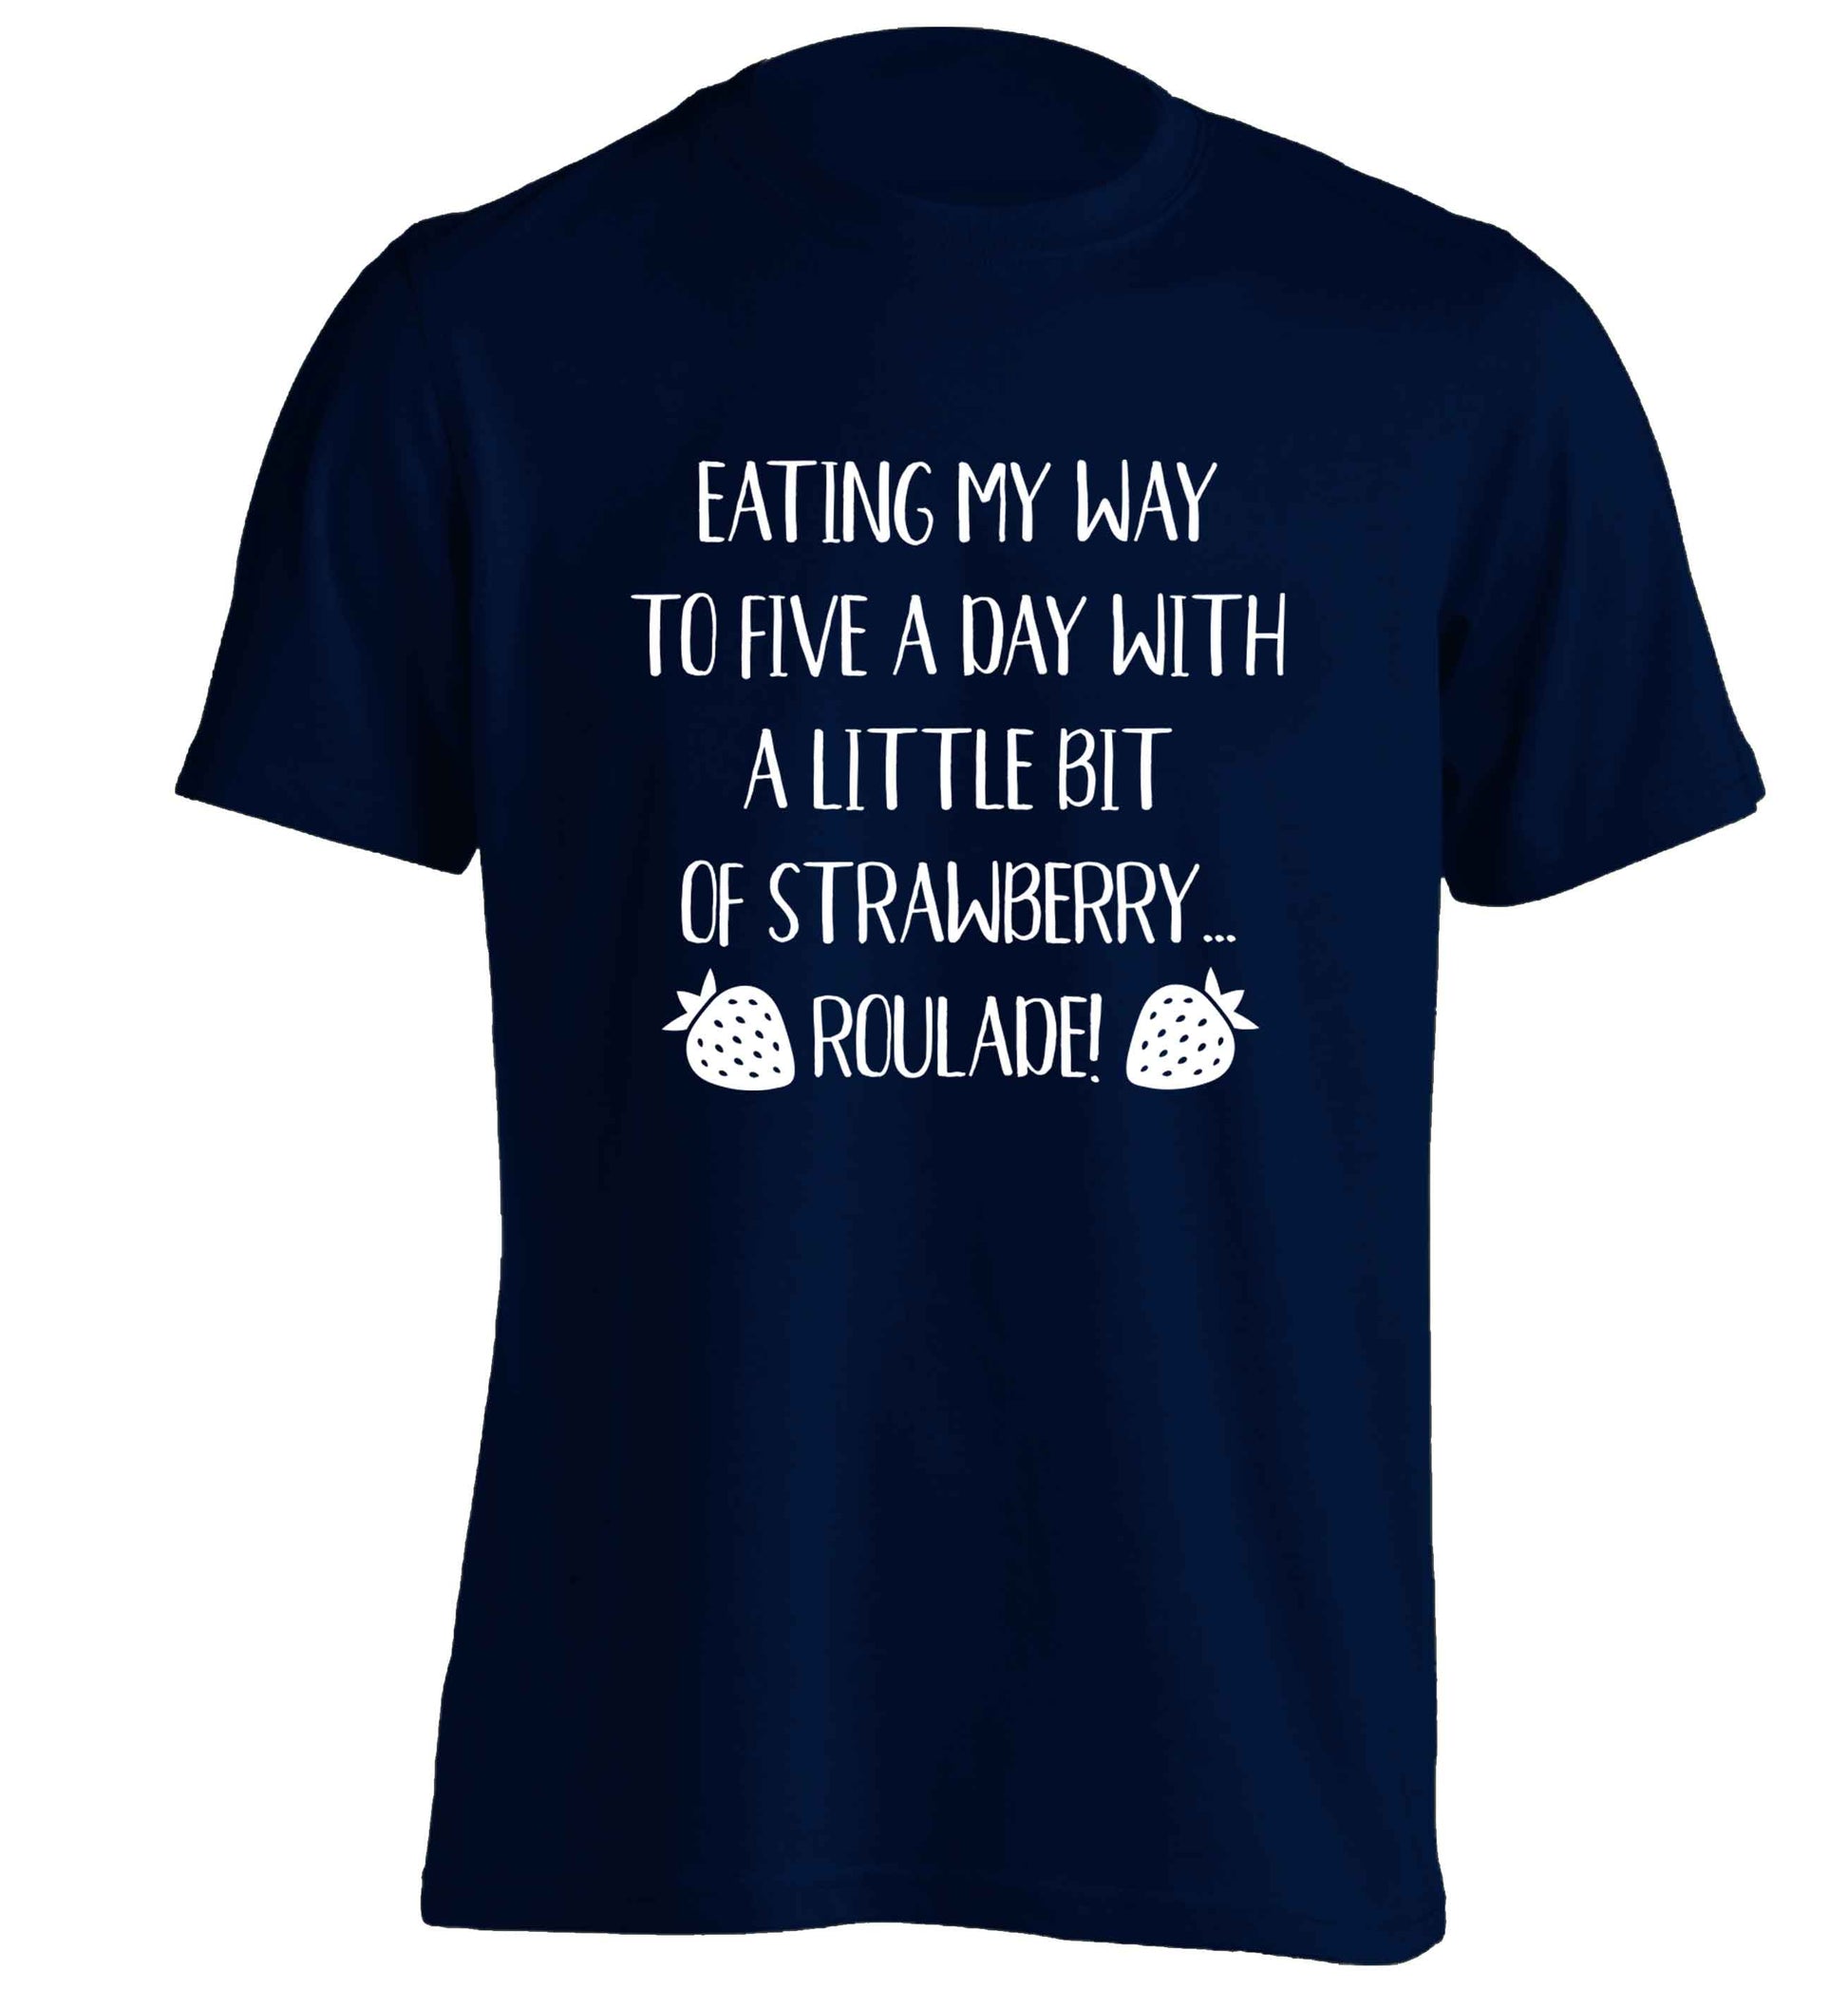 Eating my way to five a day with a little bit of strawberry roulade adults unisex navy Tshirt 2XL